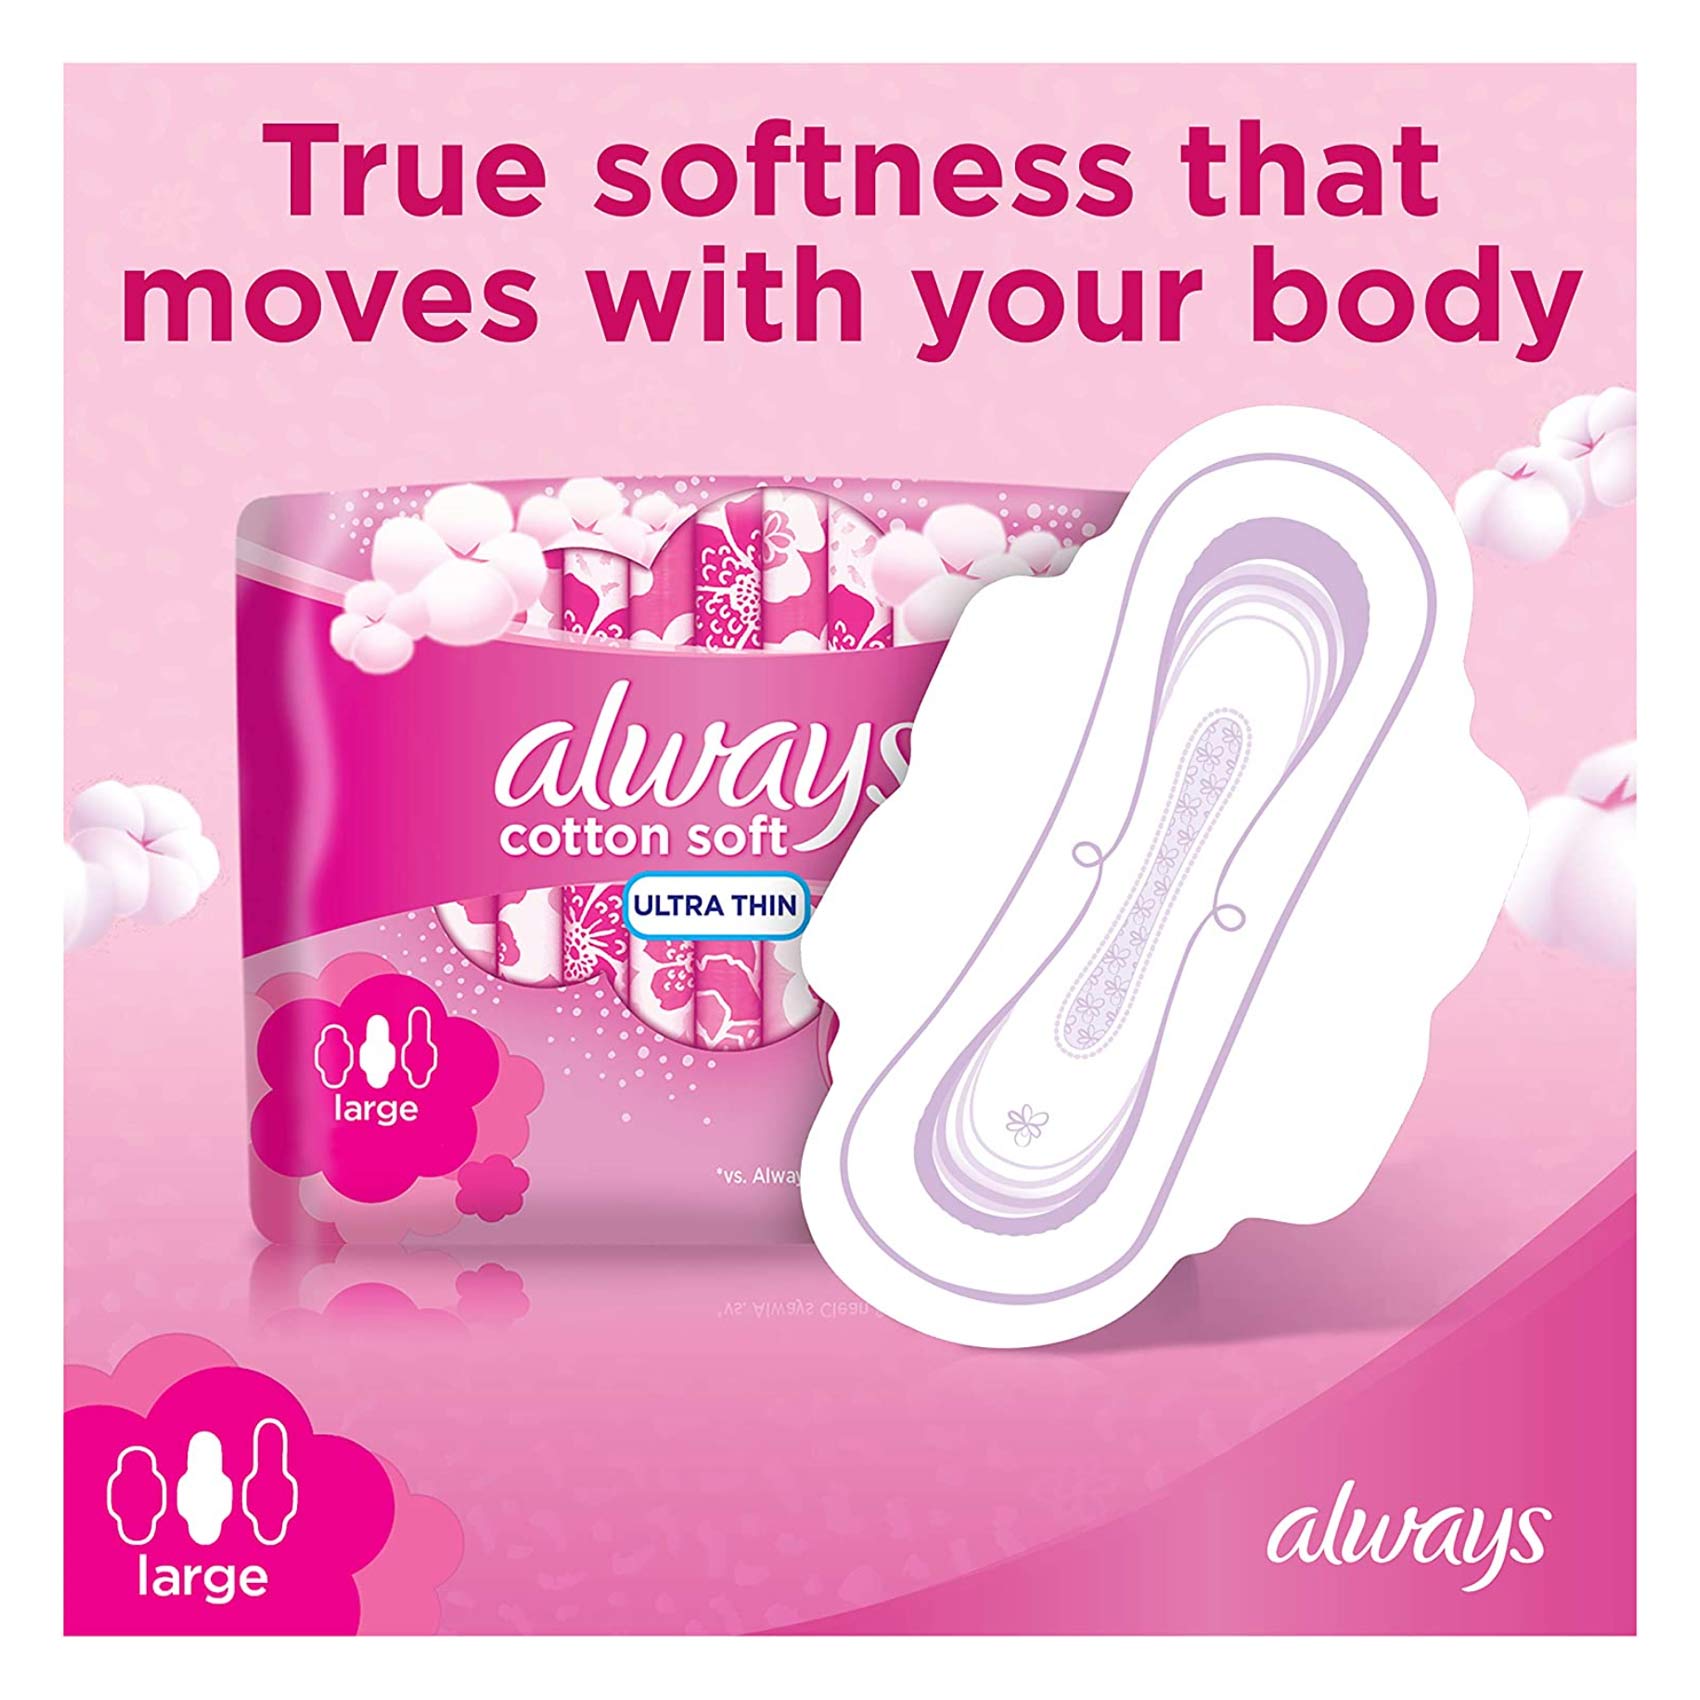 Always Cotton Soft Ultra Thin Large Sanitary Pads 16 Count